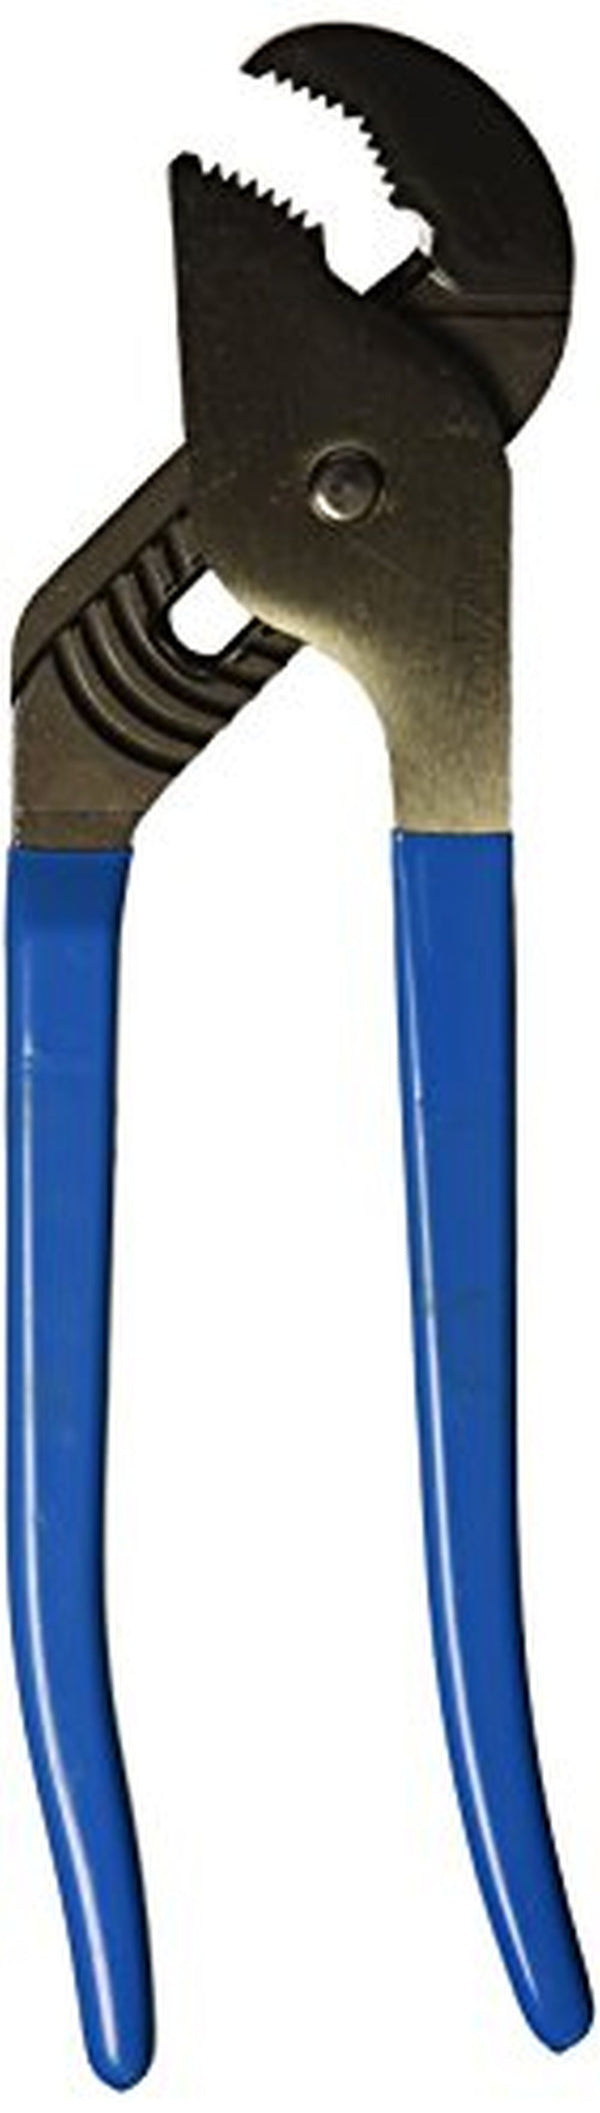 Wright Tool 9C414 14 in. Tongue & Groove Pliers